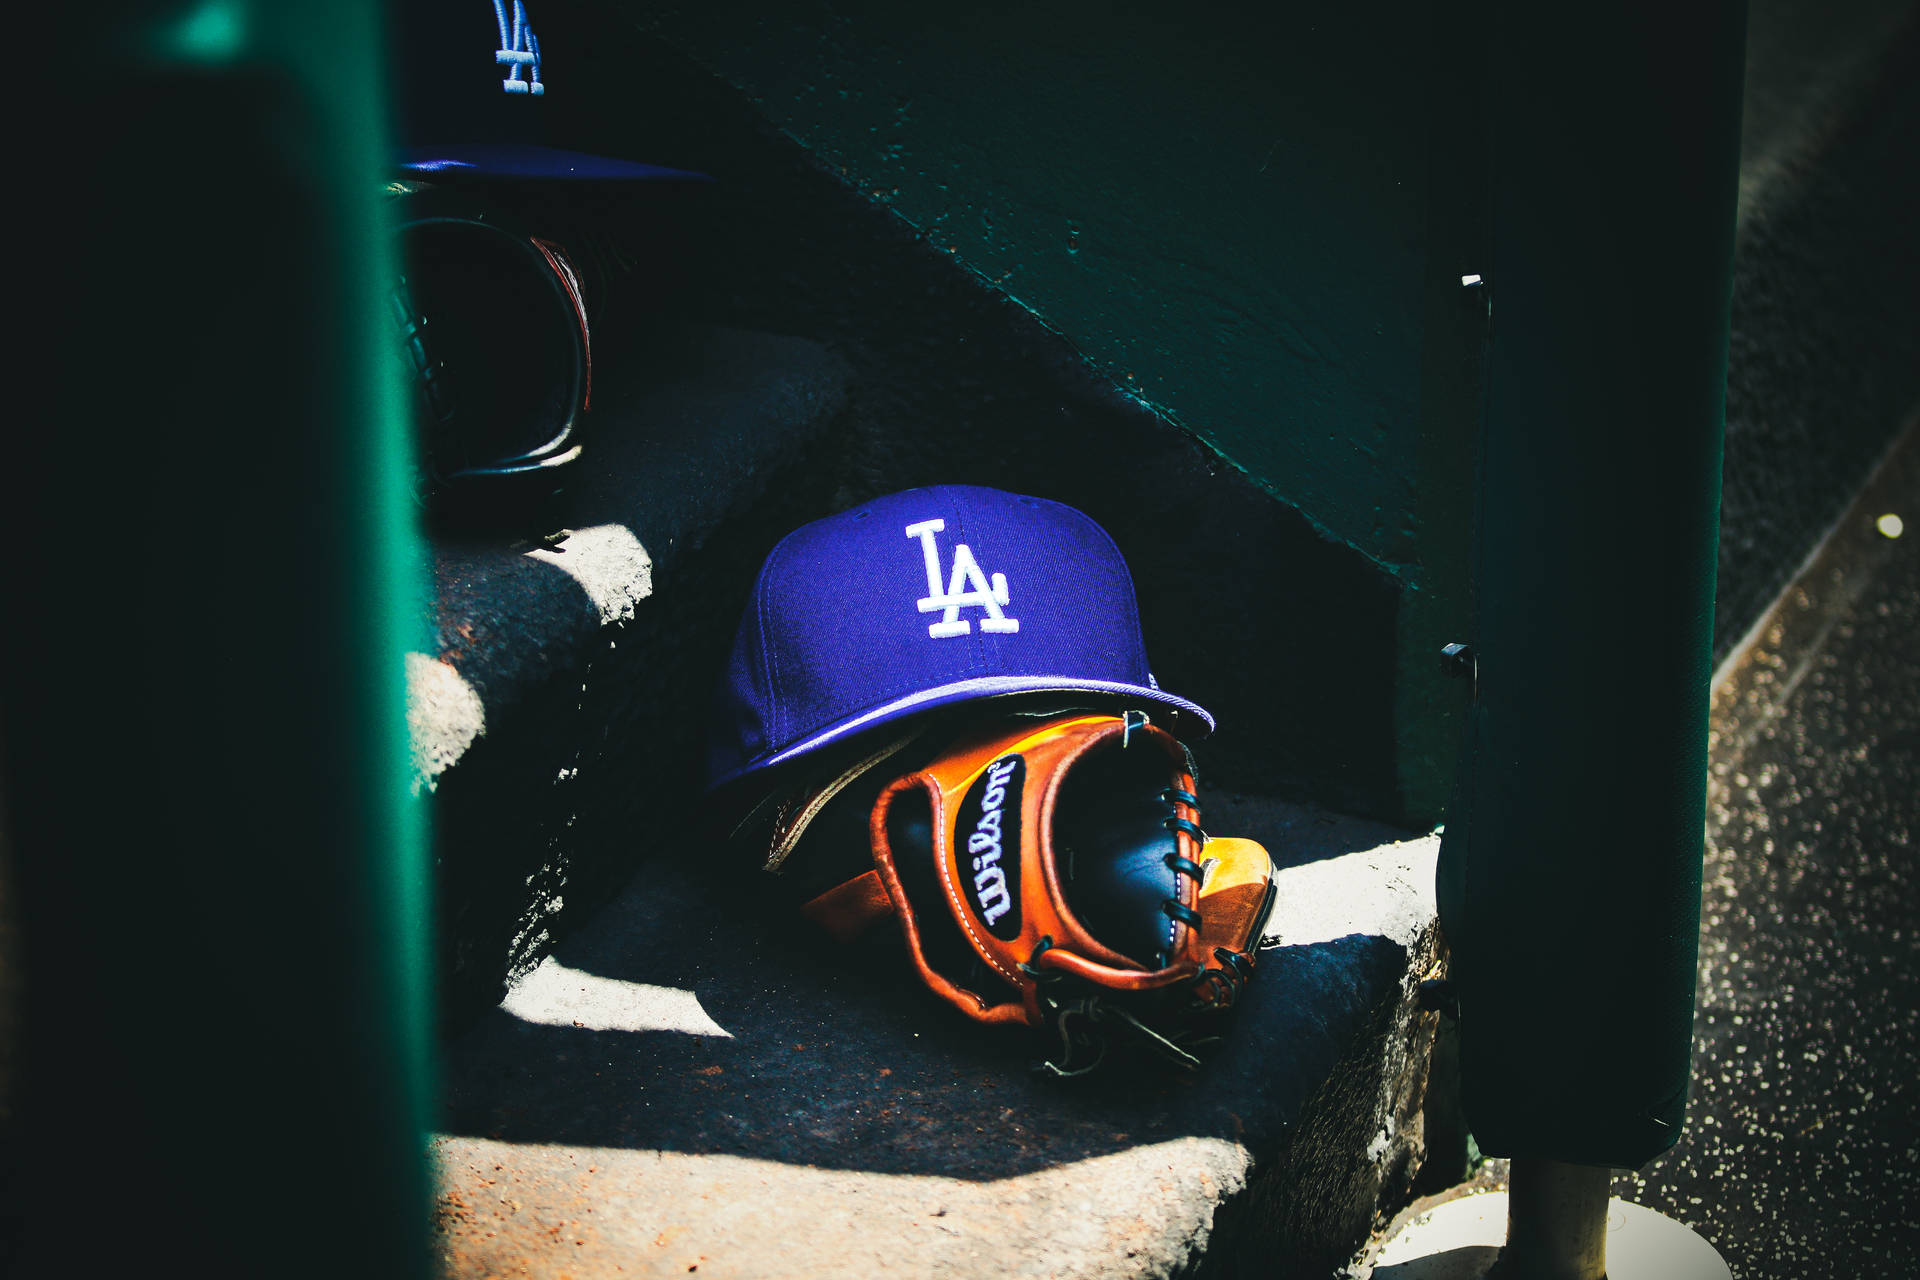 Dodgers 5472X3648 Wallpaper and Background Image